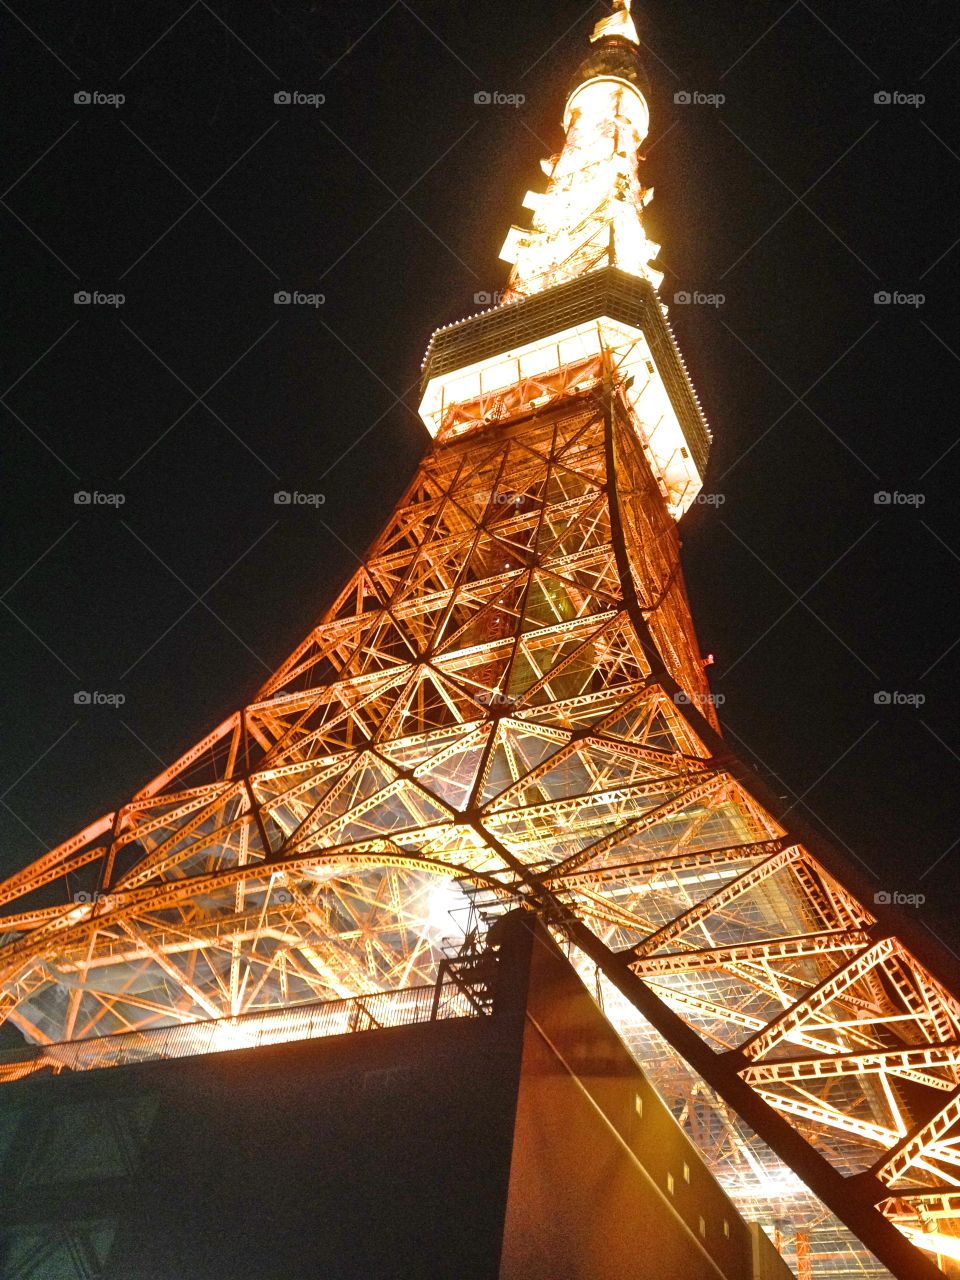 Nor the Eiffel Tower... actually is a shot from the Tokyo tower 